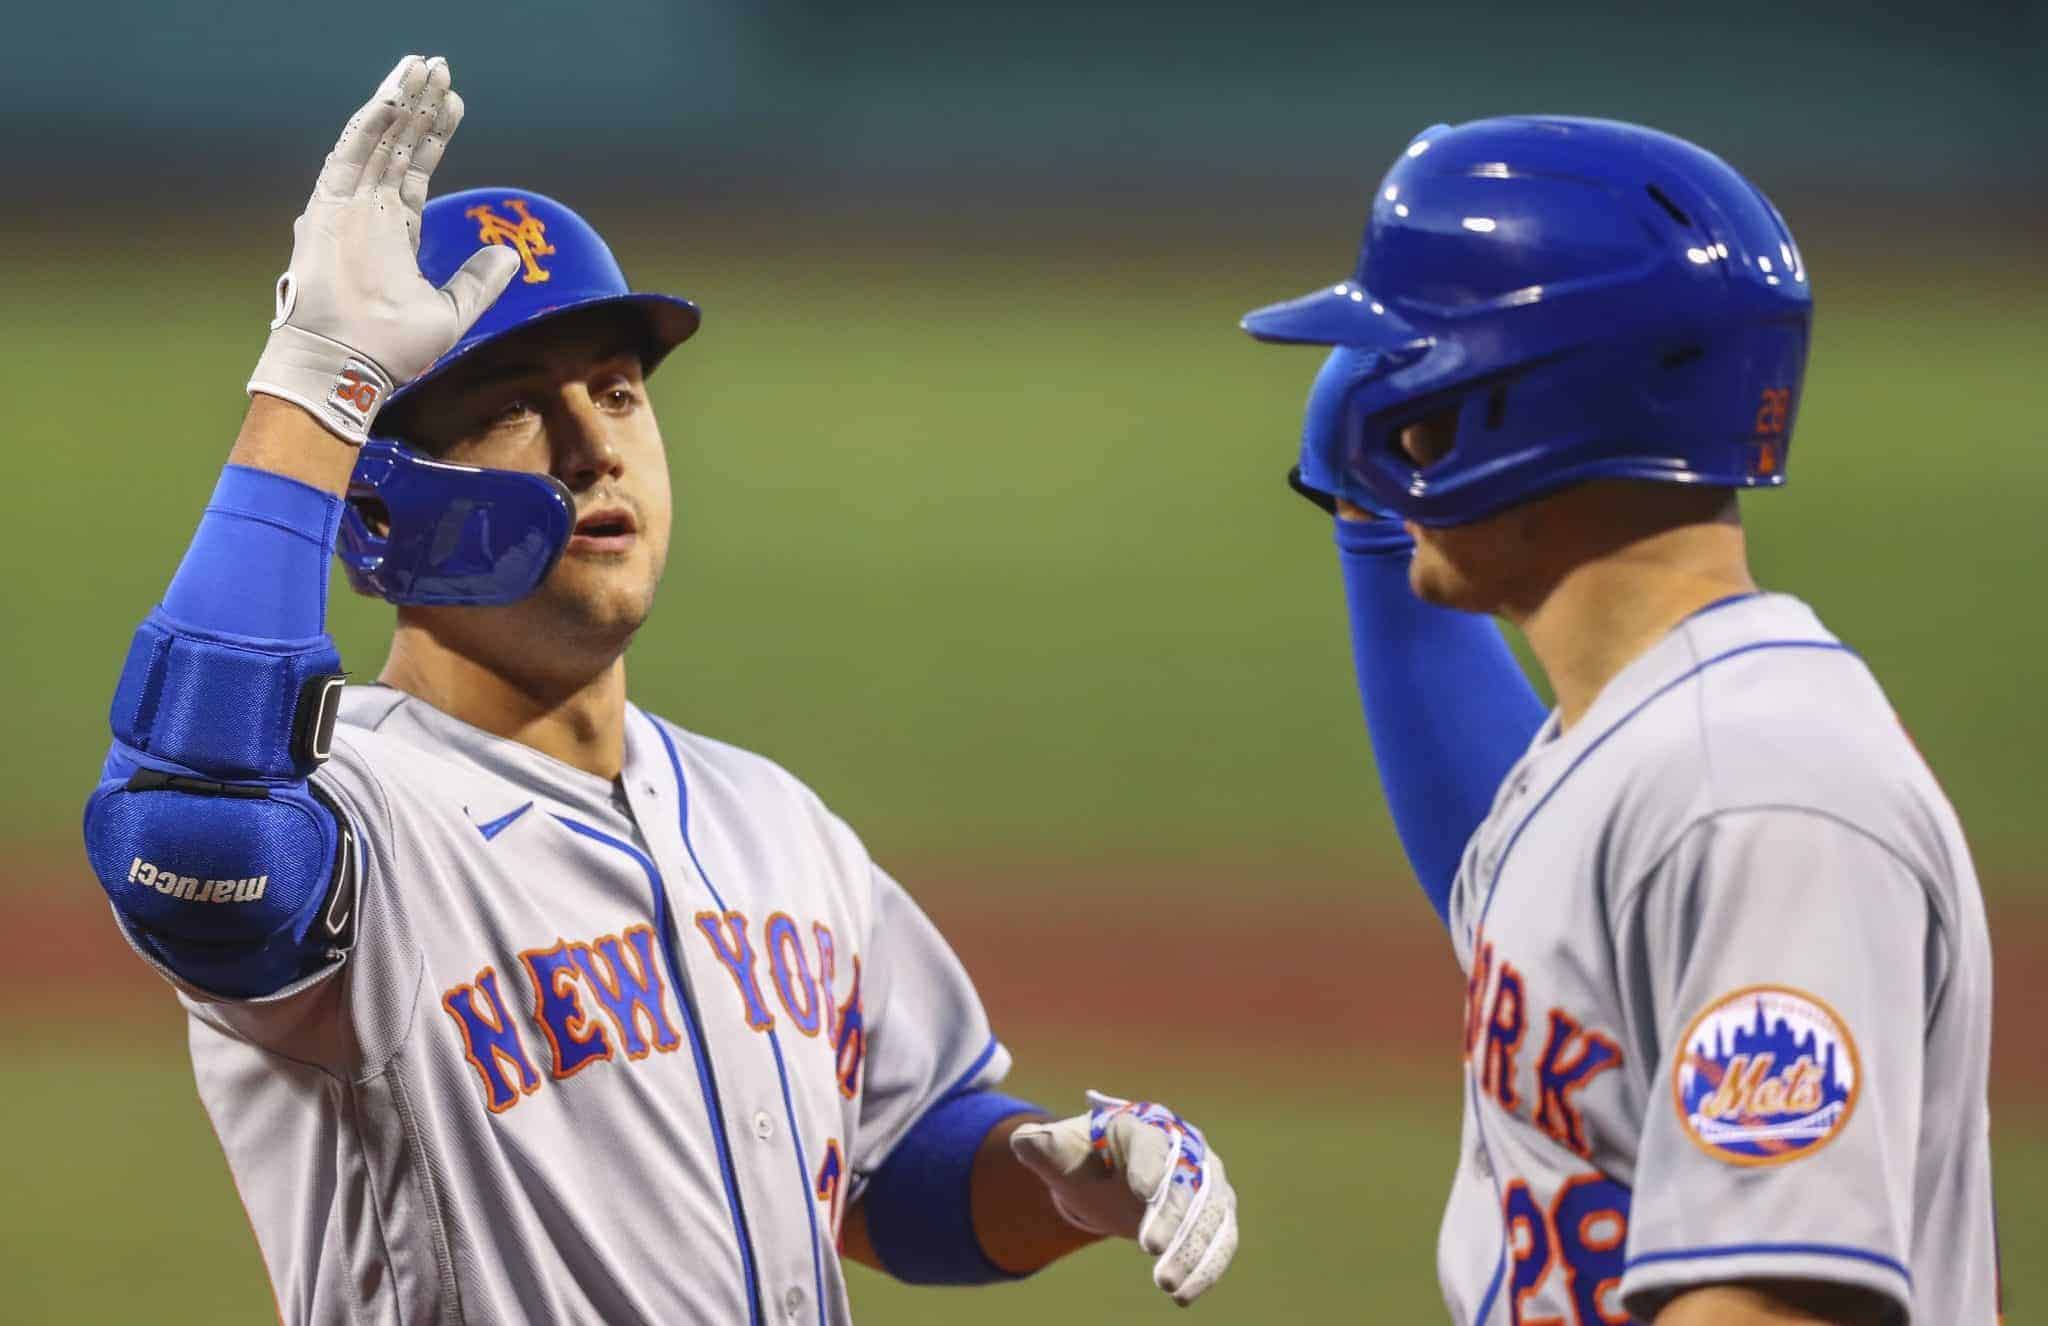 BOSTON, MA - JULY 27: Michael Conforto #30 of the New York Mets high fives J.D. Davis #28 after hitting a two-run home run in the second inning of a game against the Boston Red Sox at Fenway Park on July 27, 2020 in Boston, Massachusetts.